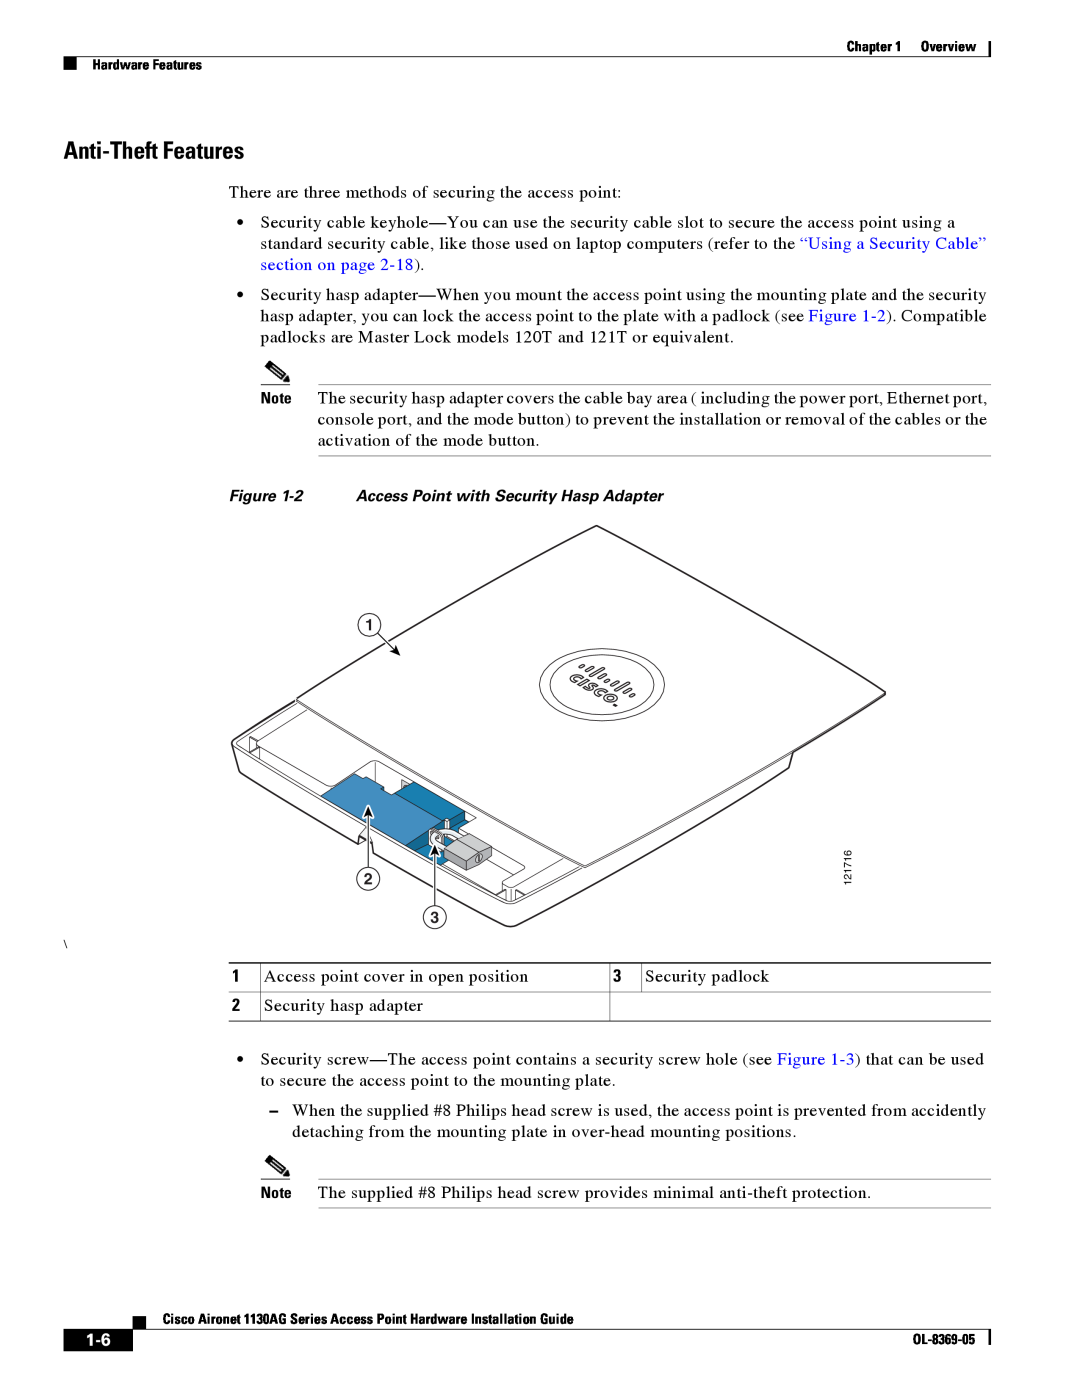 Cisco Systems 1130AG manual Anti-Theft Features 